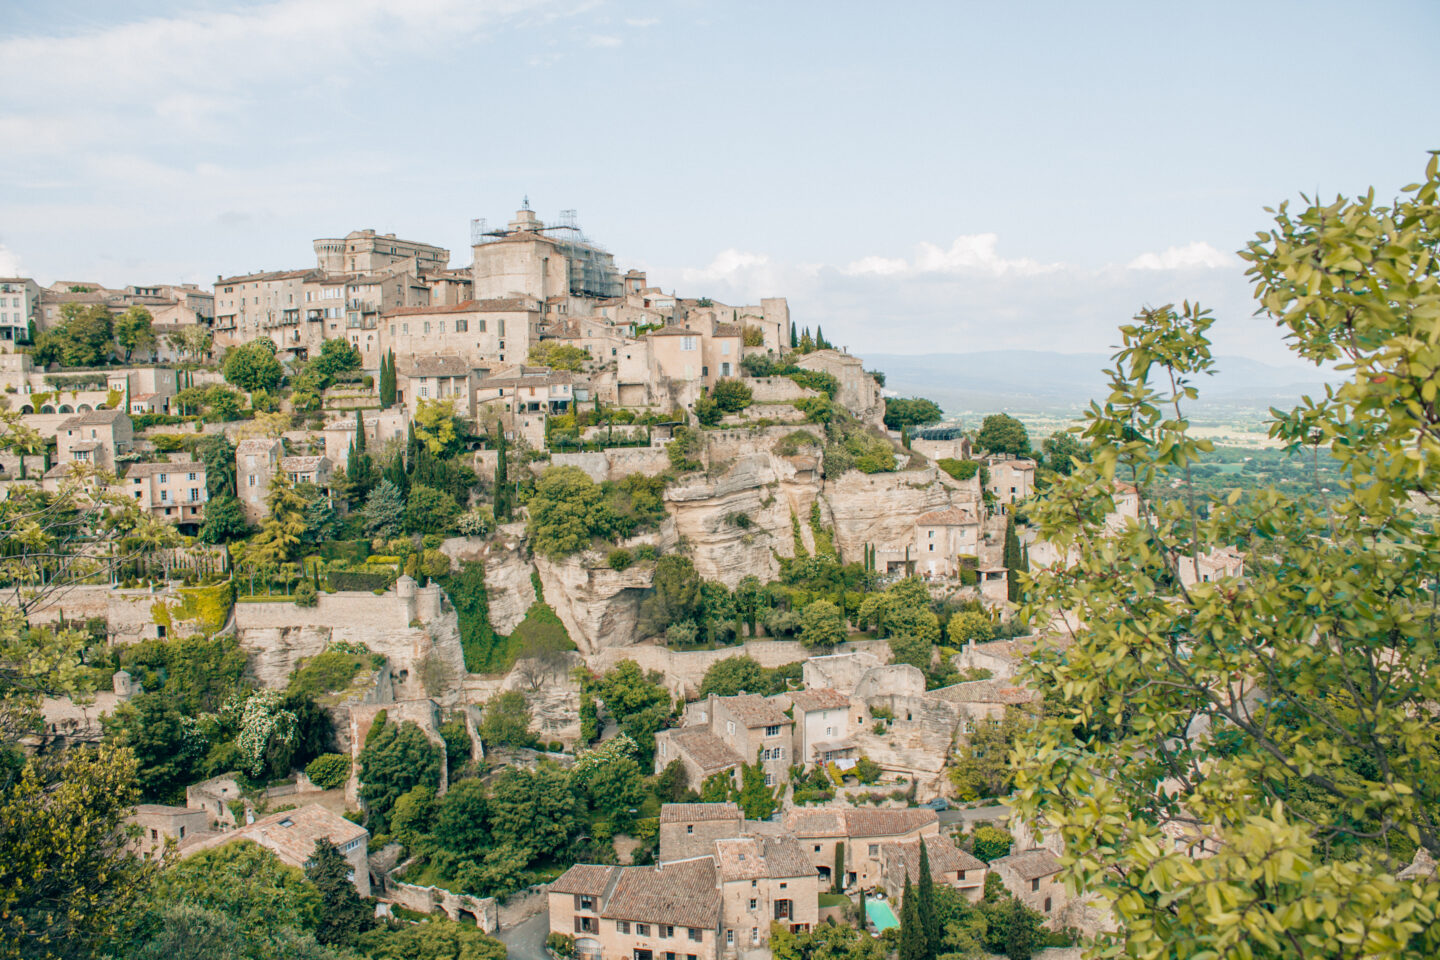 The stunning ancient town of Gordes in Provence is one of the top places to visit in France